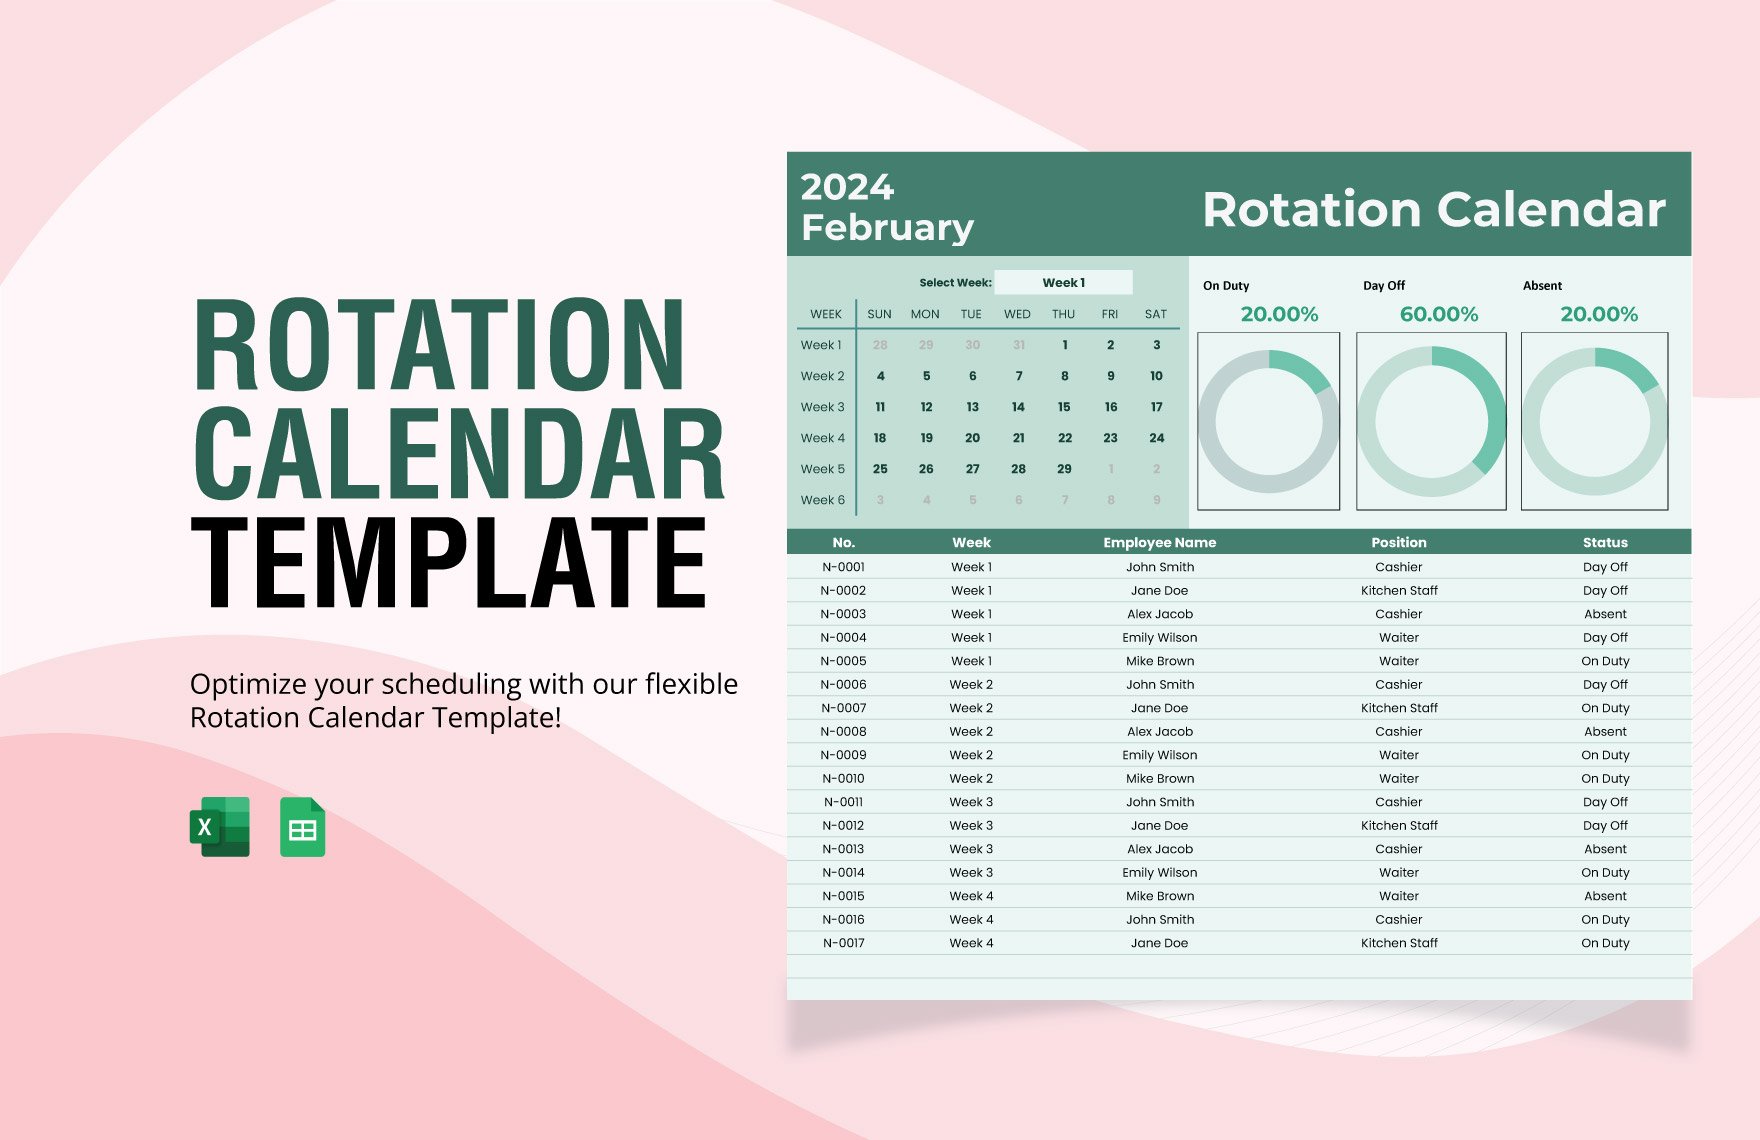 Rotation Calendar Template in Excel, Google Sheets